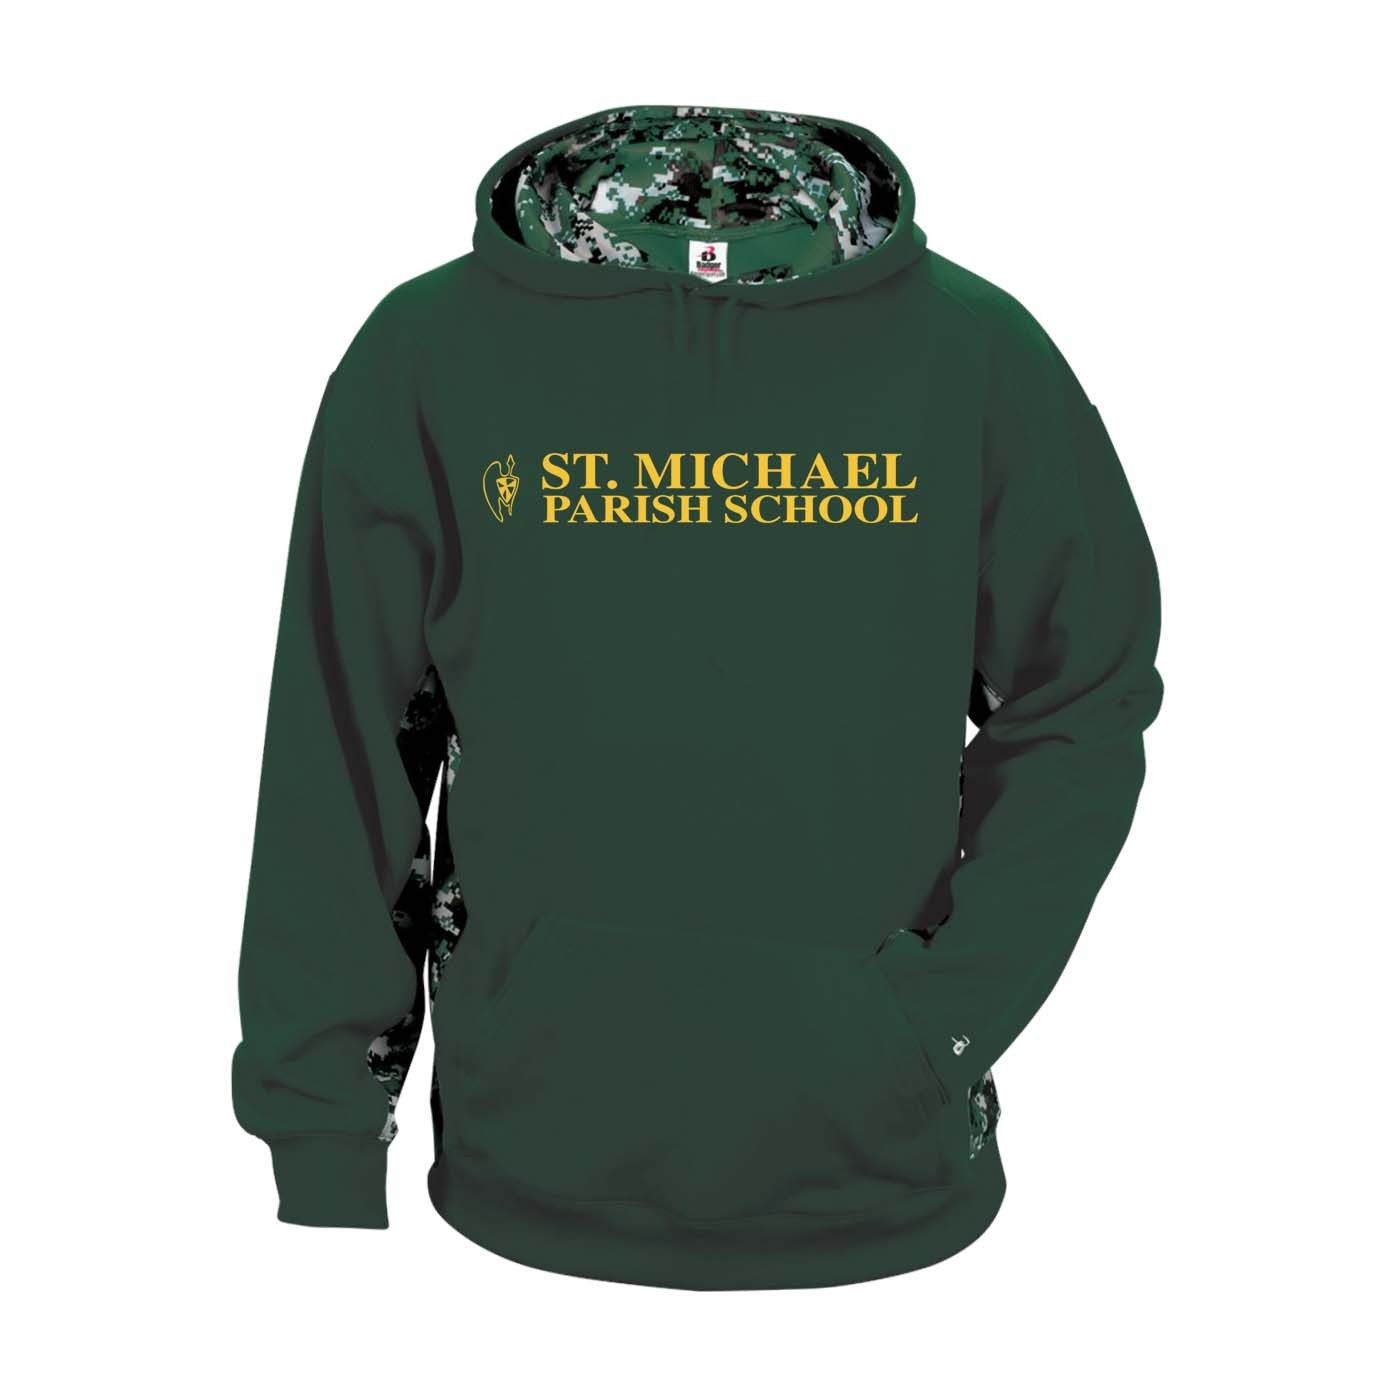 SMSU Spirit Digital Color Block Hoodie w/ Gold Logo #19 - Please Allow 3-4 Weeks for Delivery